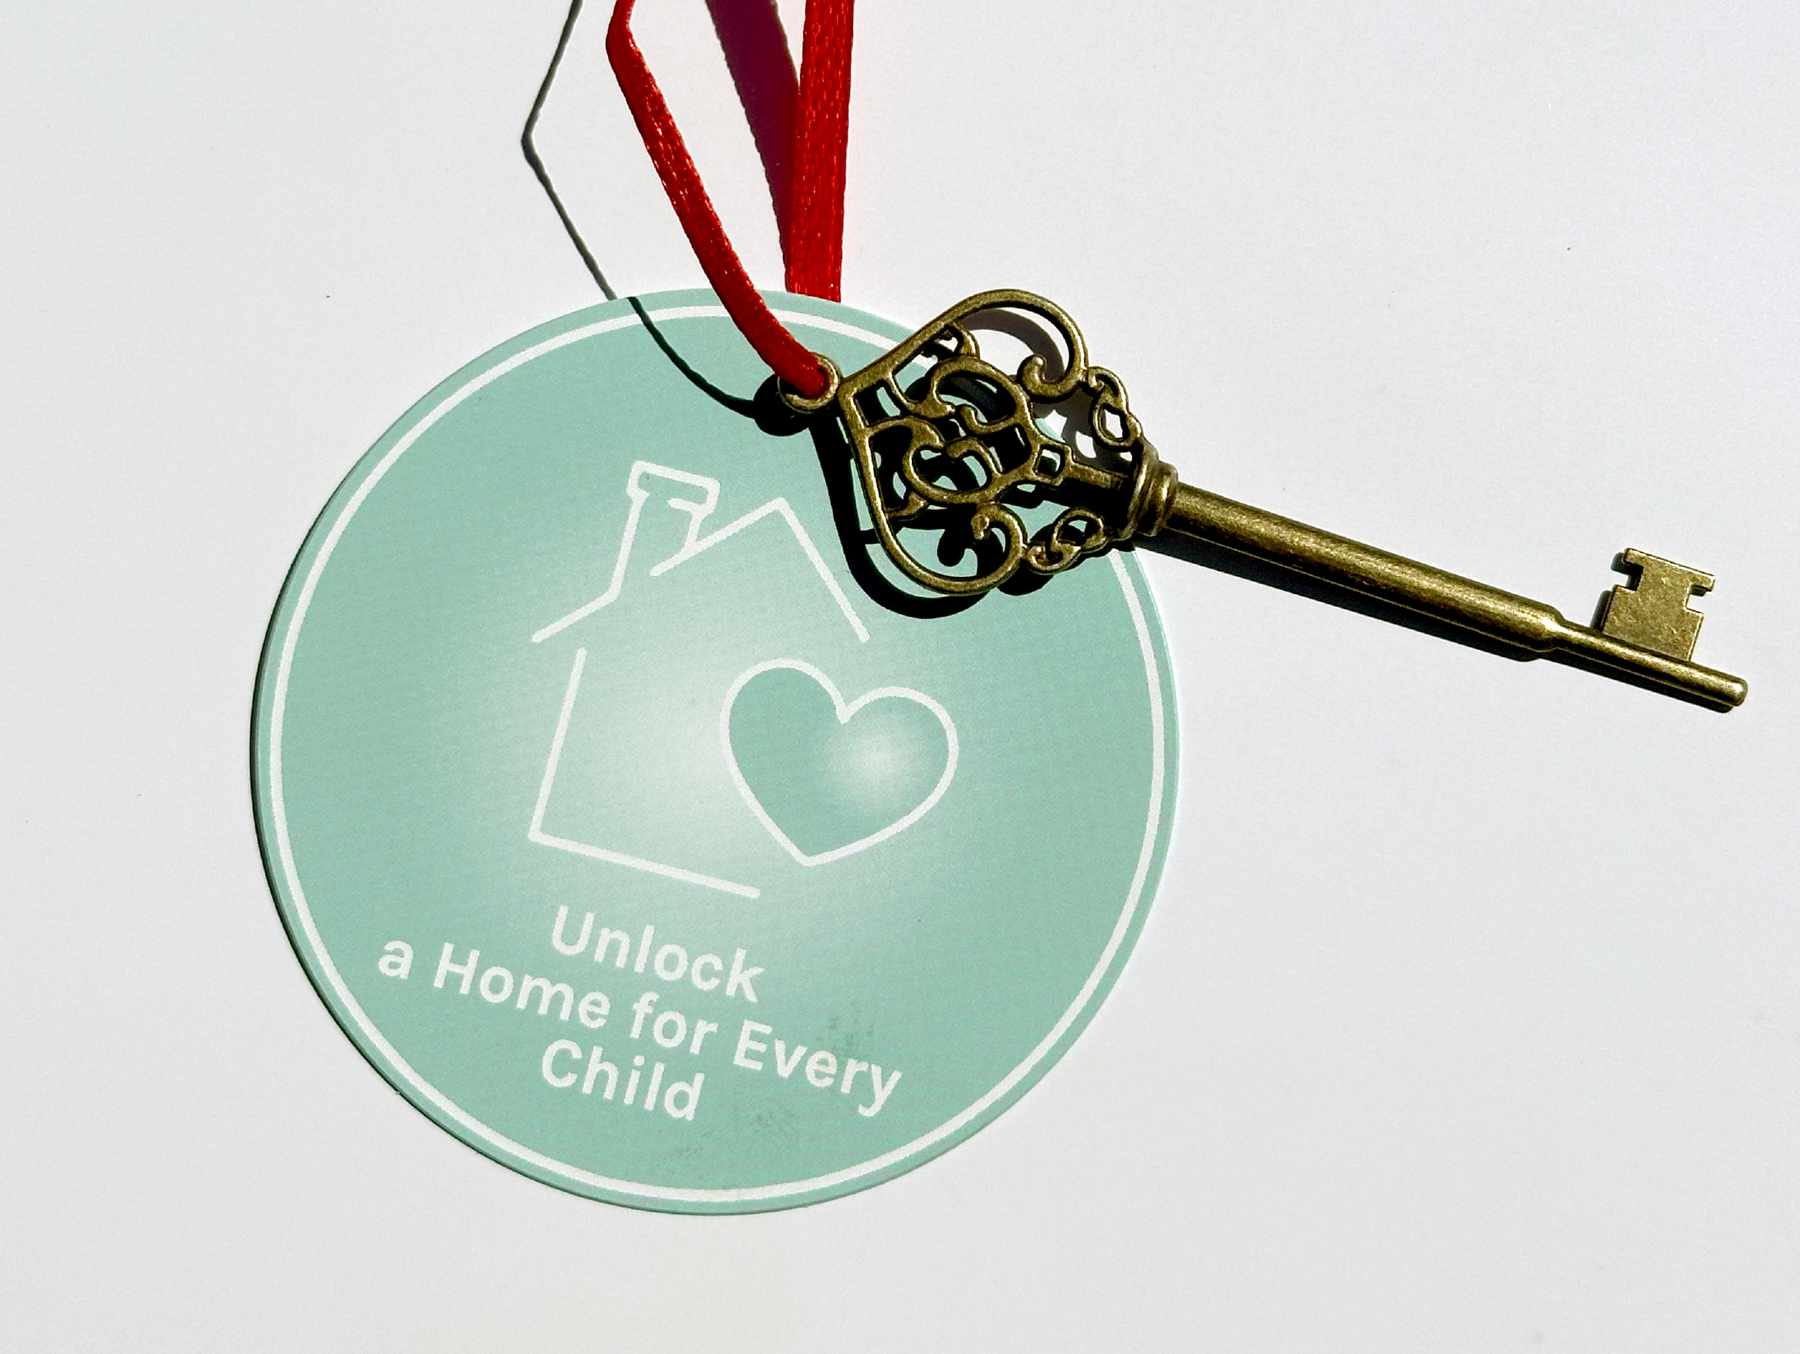 Purchase a Key to Unlock Homes for Kids